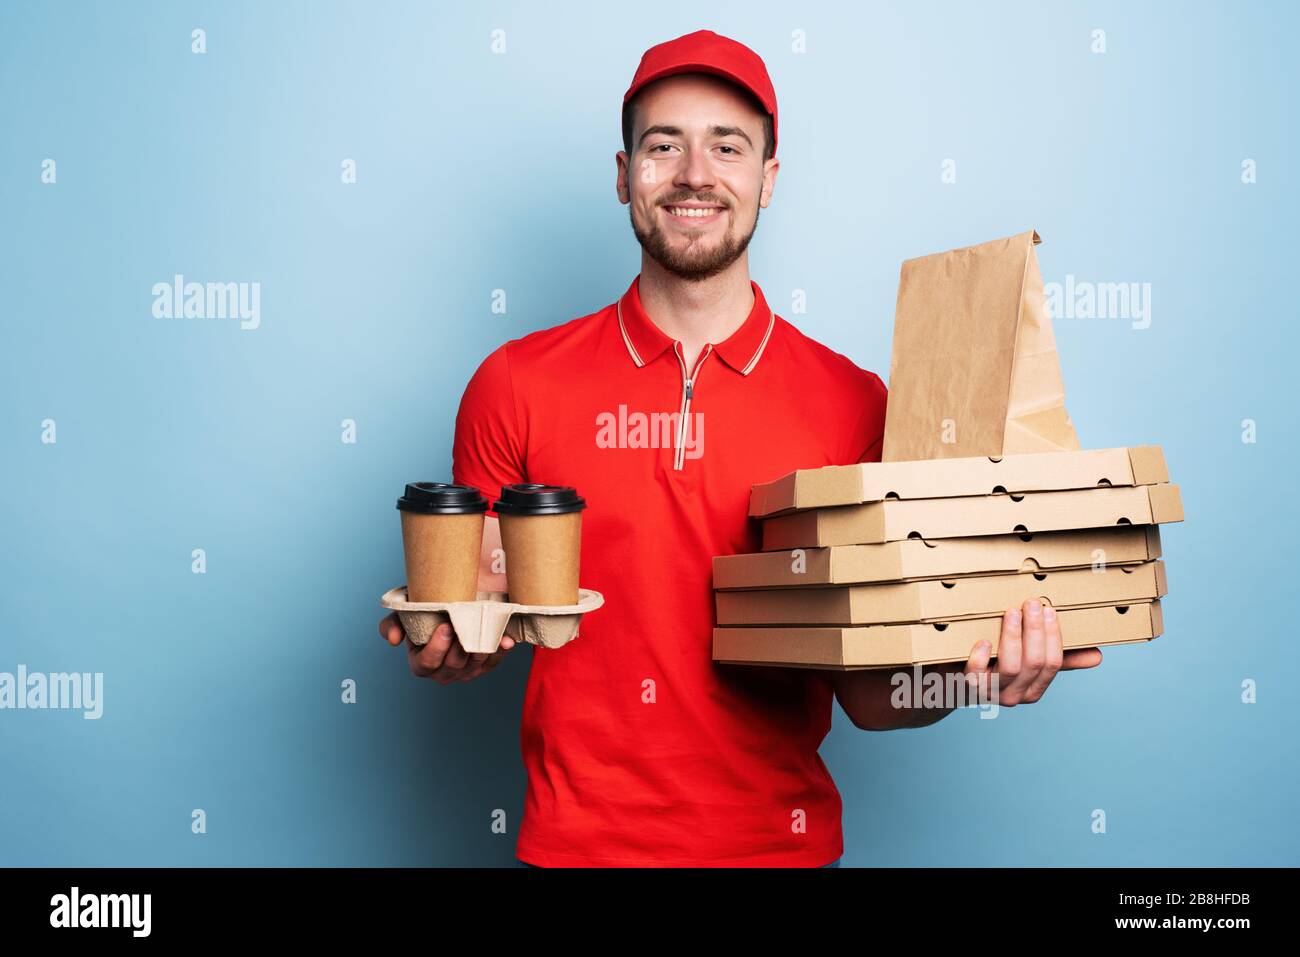 Courier is happy to deliver hot coffee and pizzas. Cyan background Stock Photo